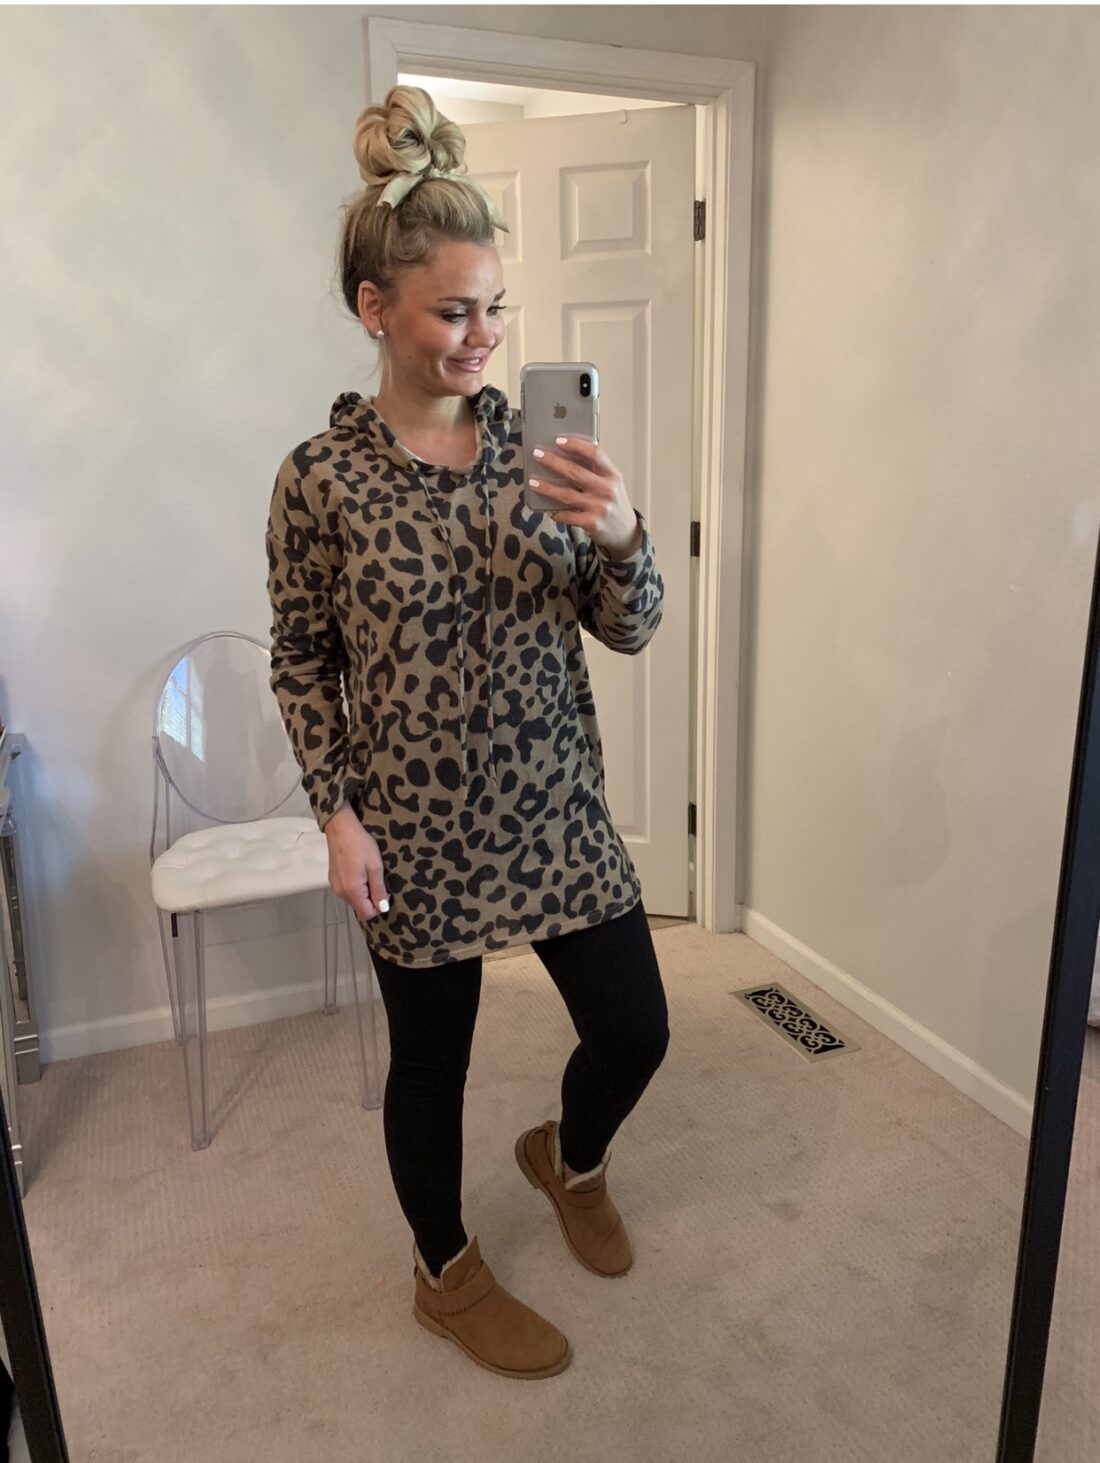 Leopard top for Fall.